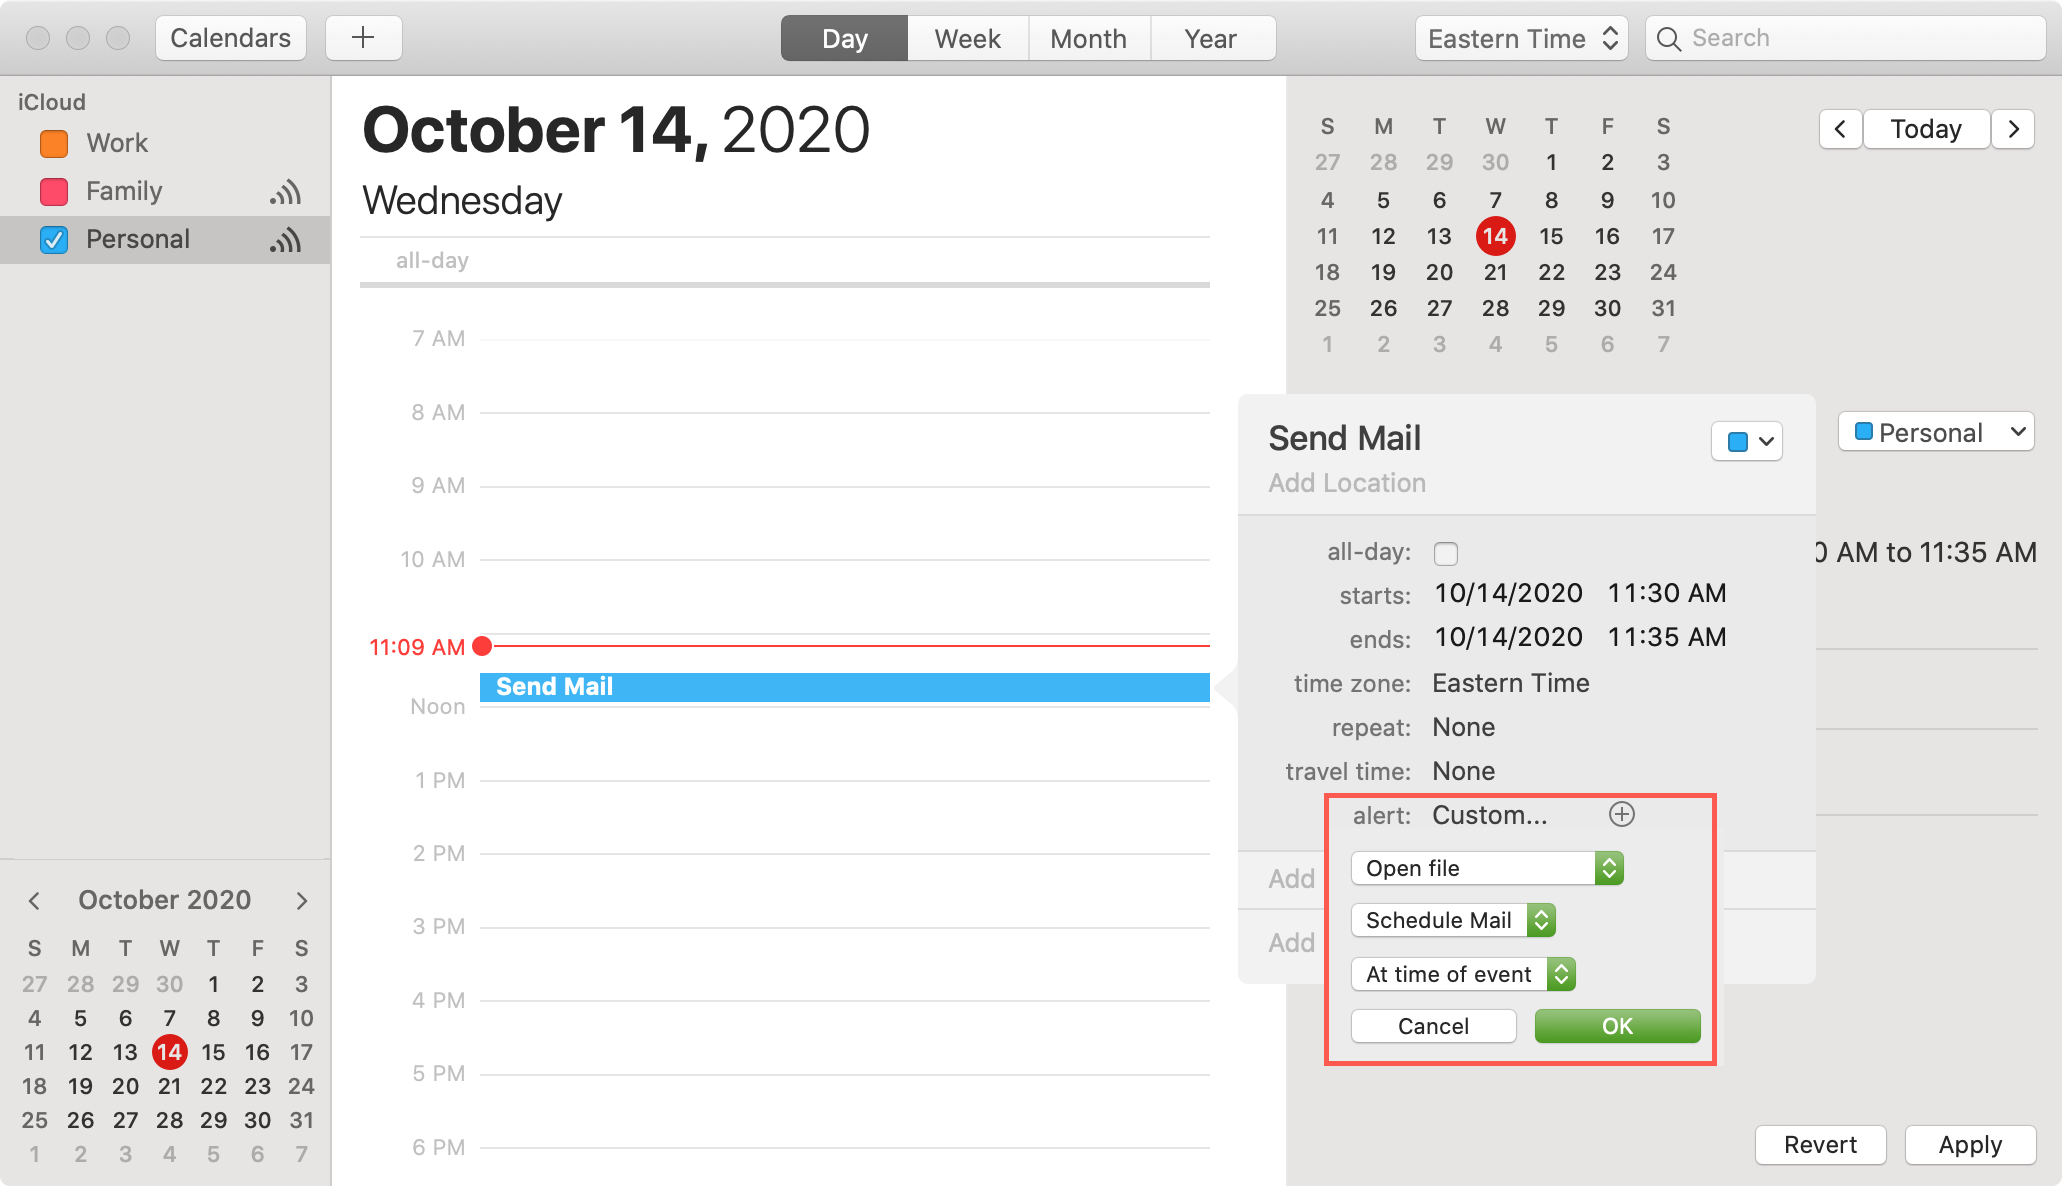 Calendar to Schedule Mail Using the Automator Application